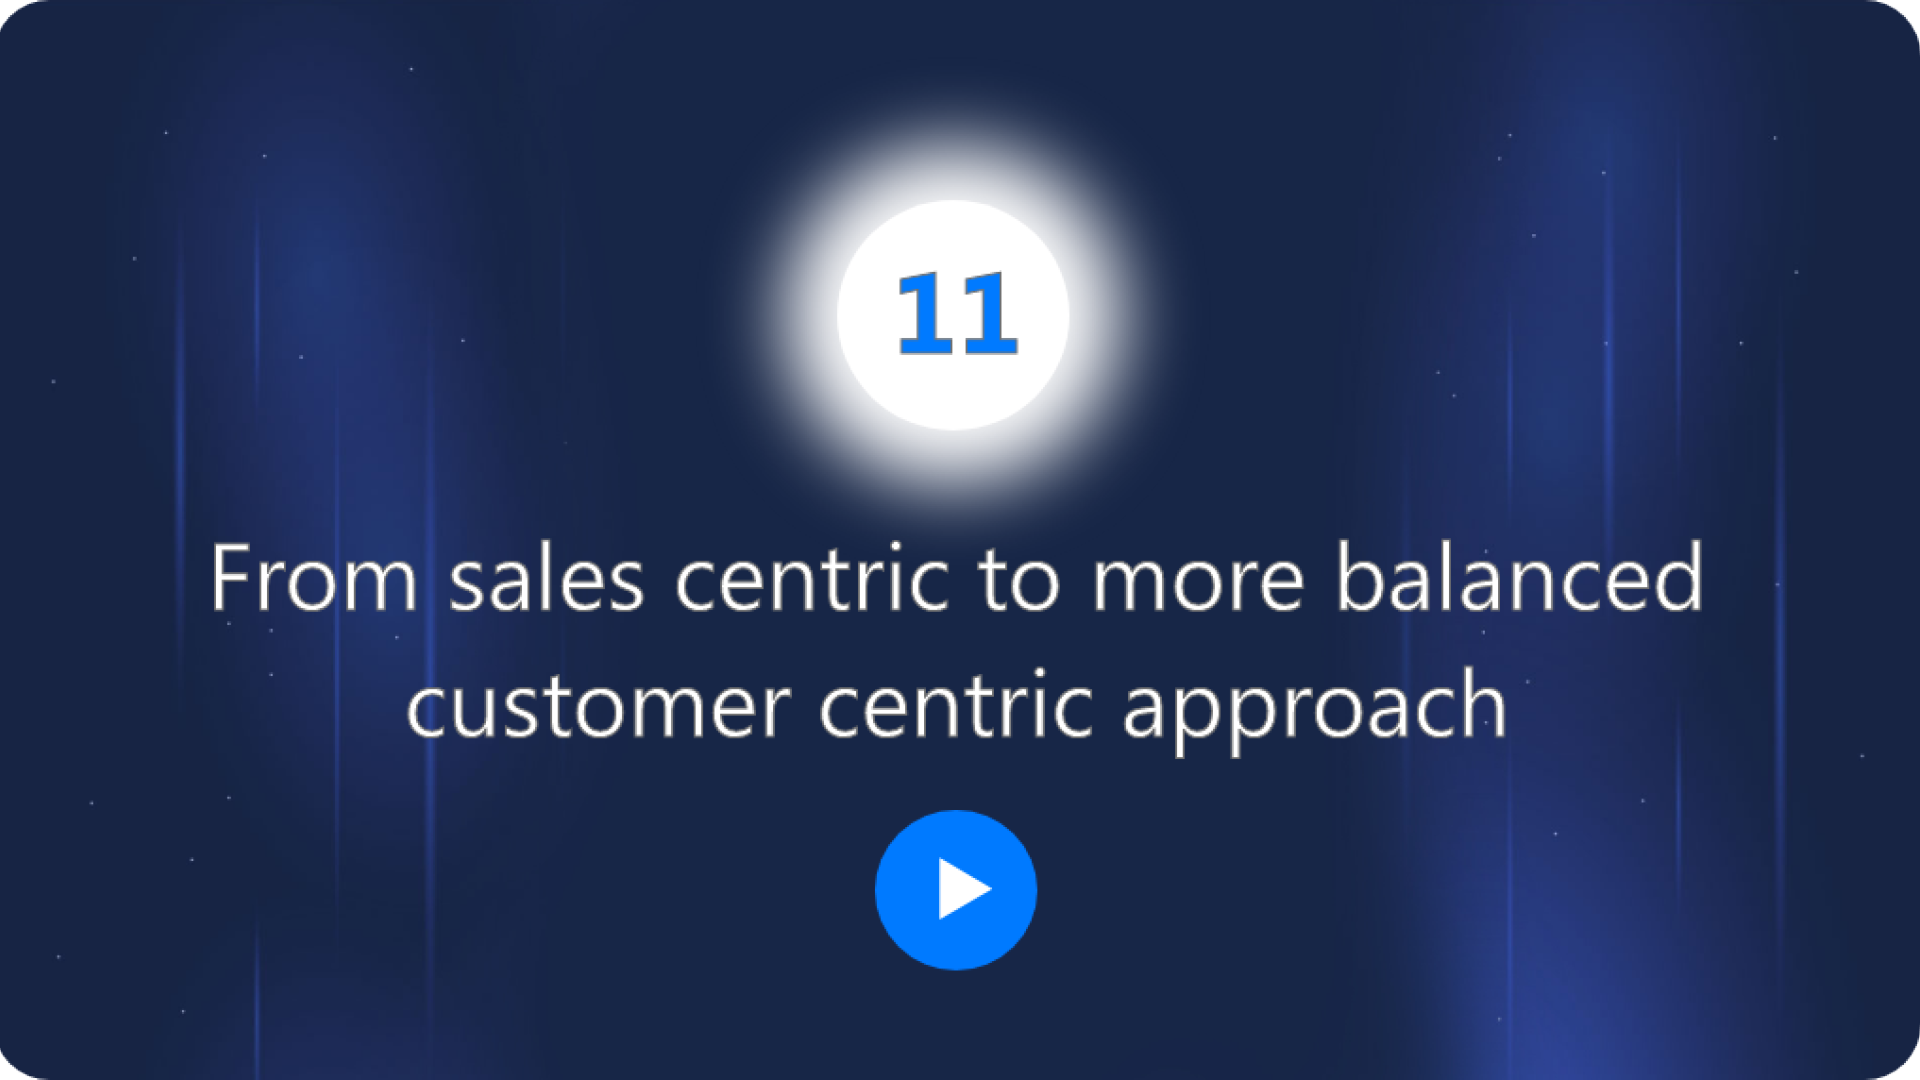 From sales centric to more balanced customer centric approach